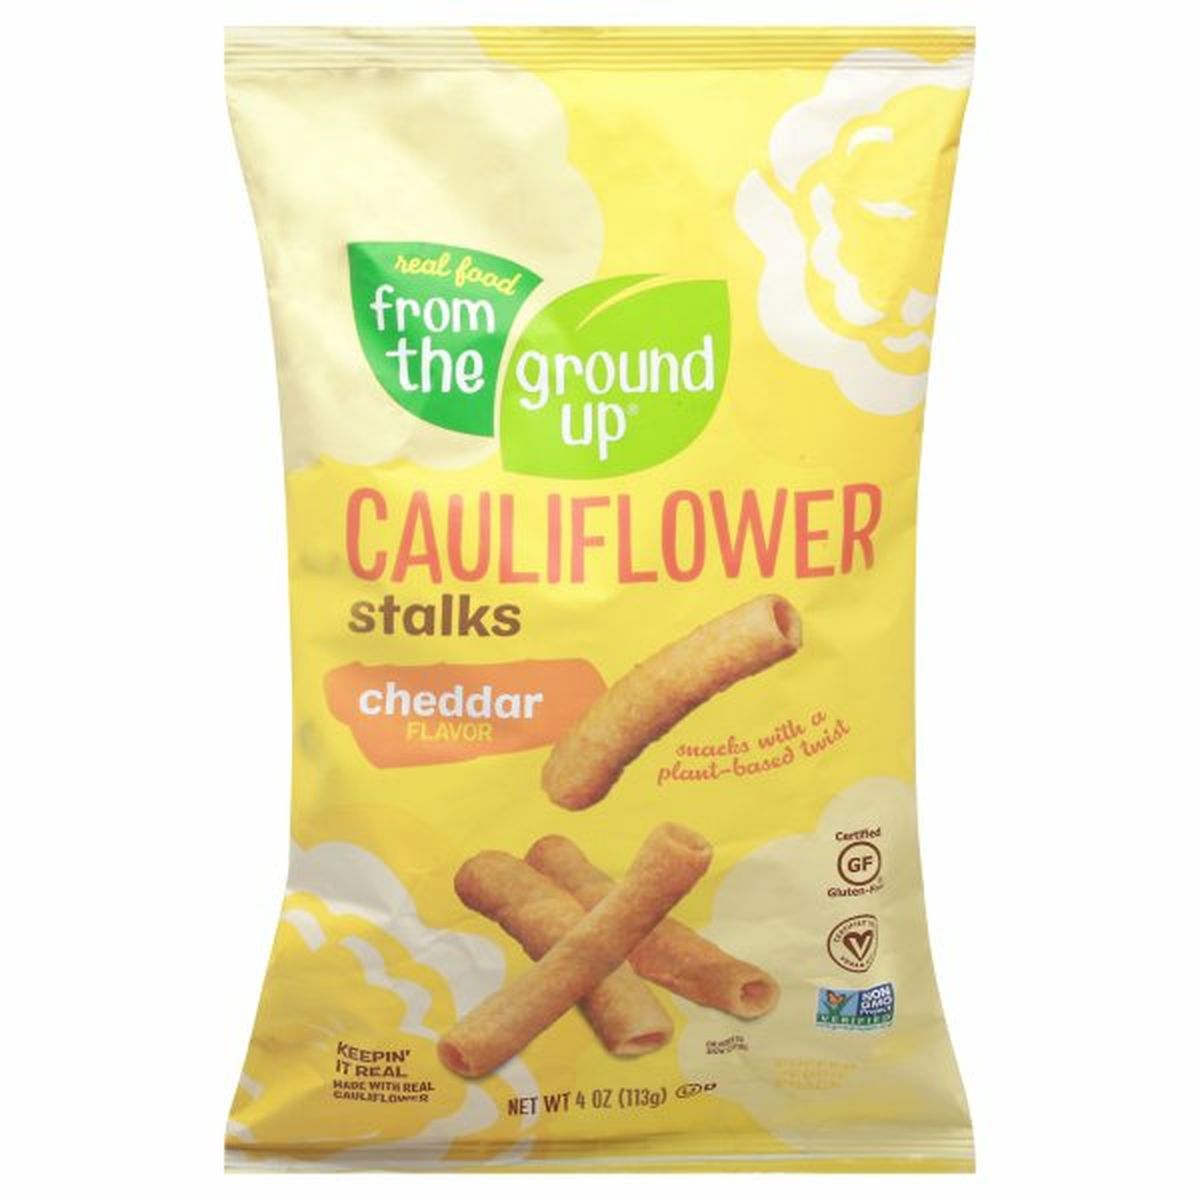 Calories in From the Ground Up Cauliflower Stalks, Cheddar Flavor